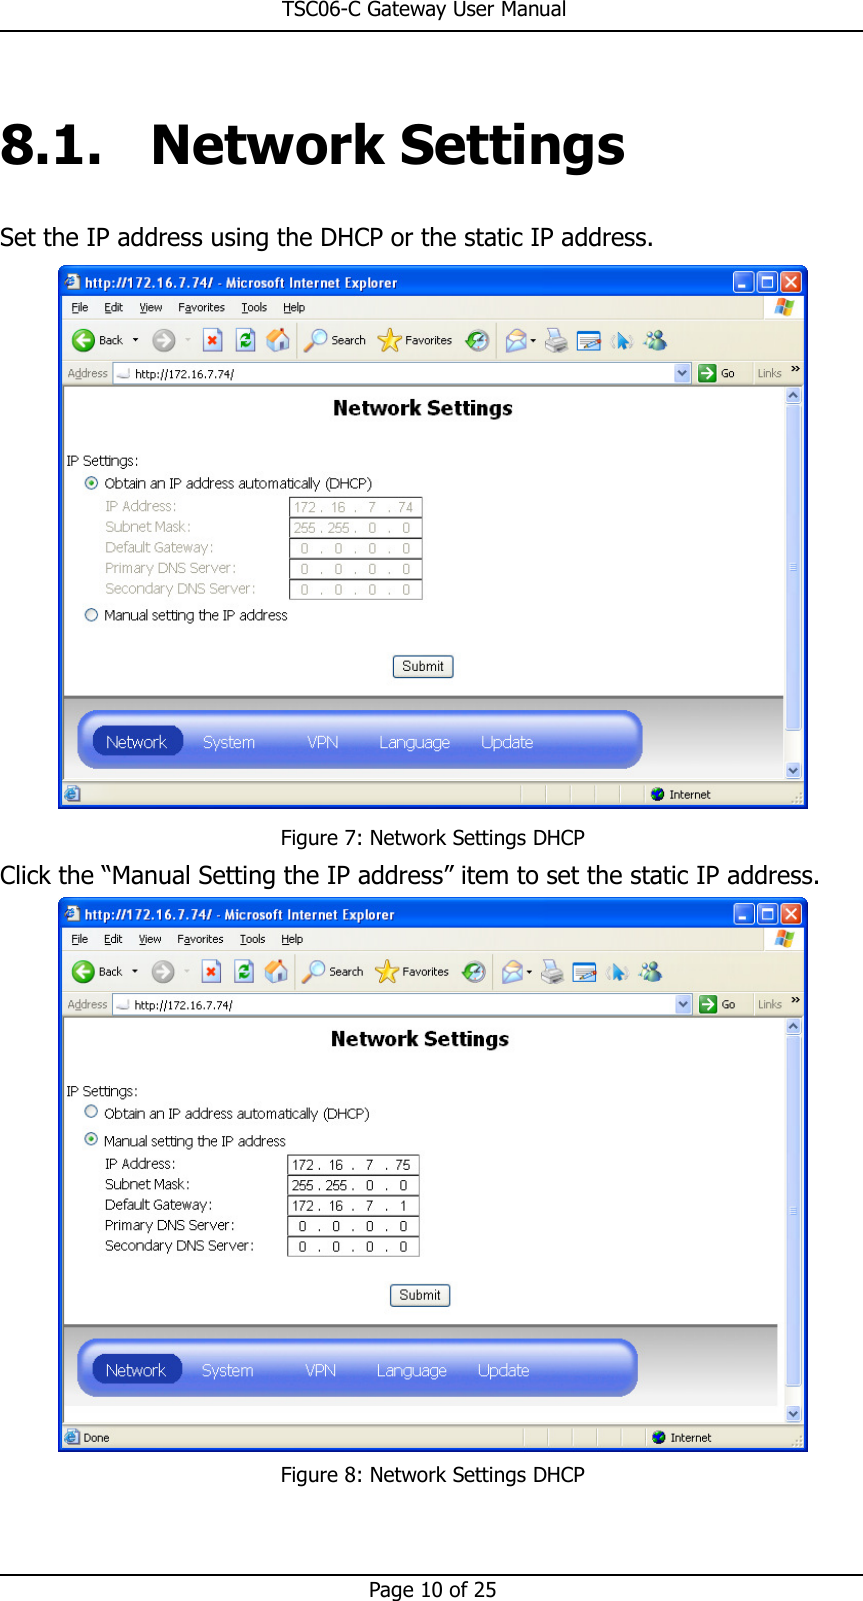                                                       TSC06-C Gateway User Manual   Page 10 of 25  8.1. Network Settings Set the IP address using the DHCP or the static IP address.  Figure 7: Network Settings DHCP Click the “Manual Setting the IP address” item to set the static IP address.  Figure 8: Network Settings DHCP  